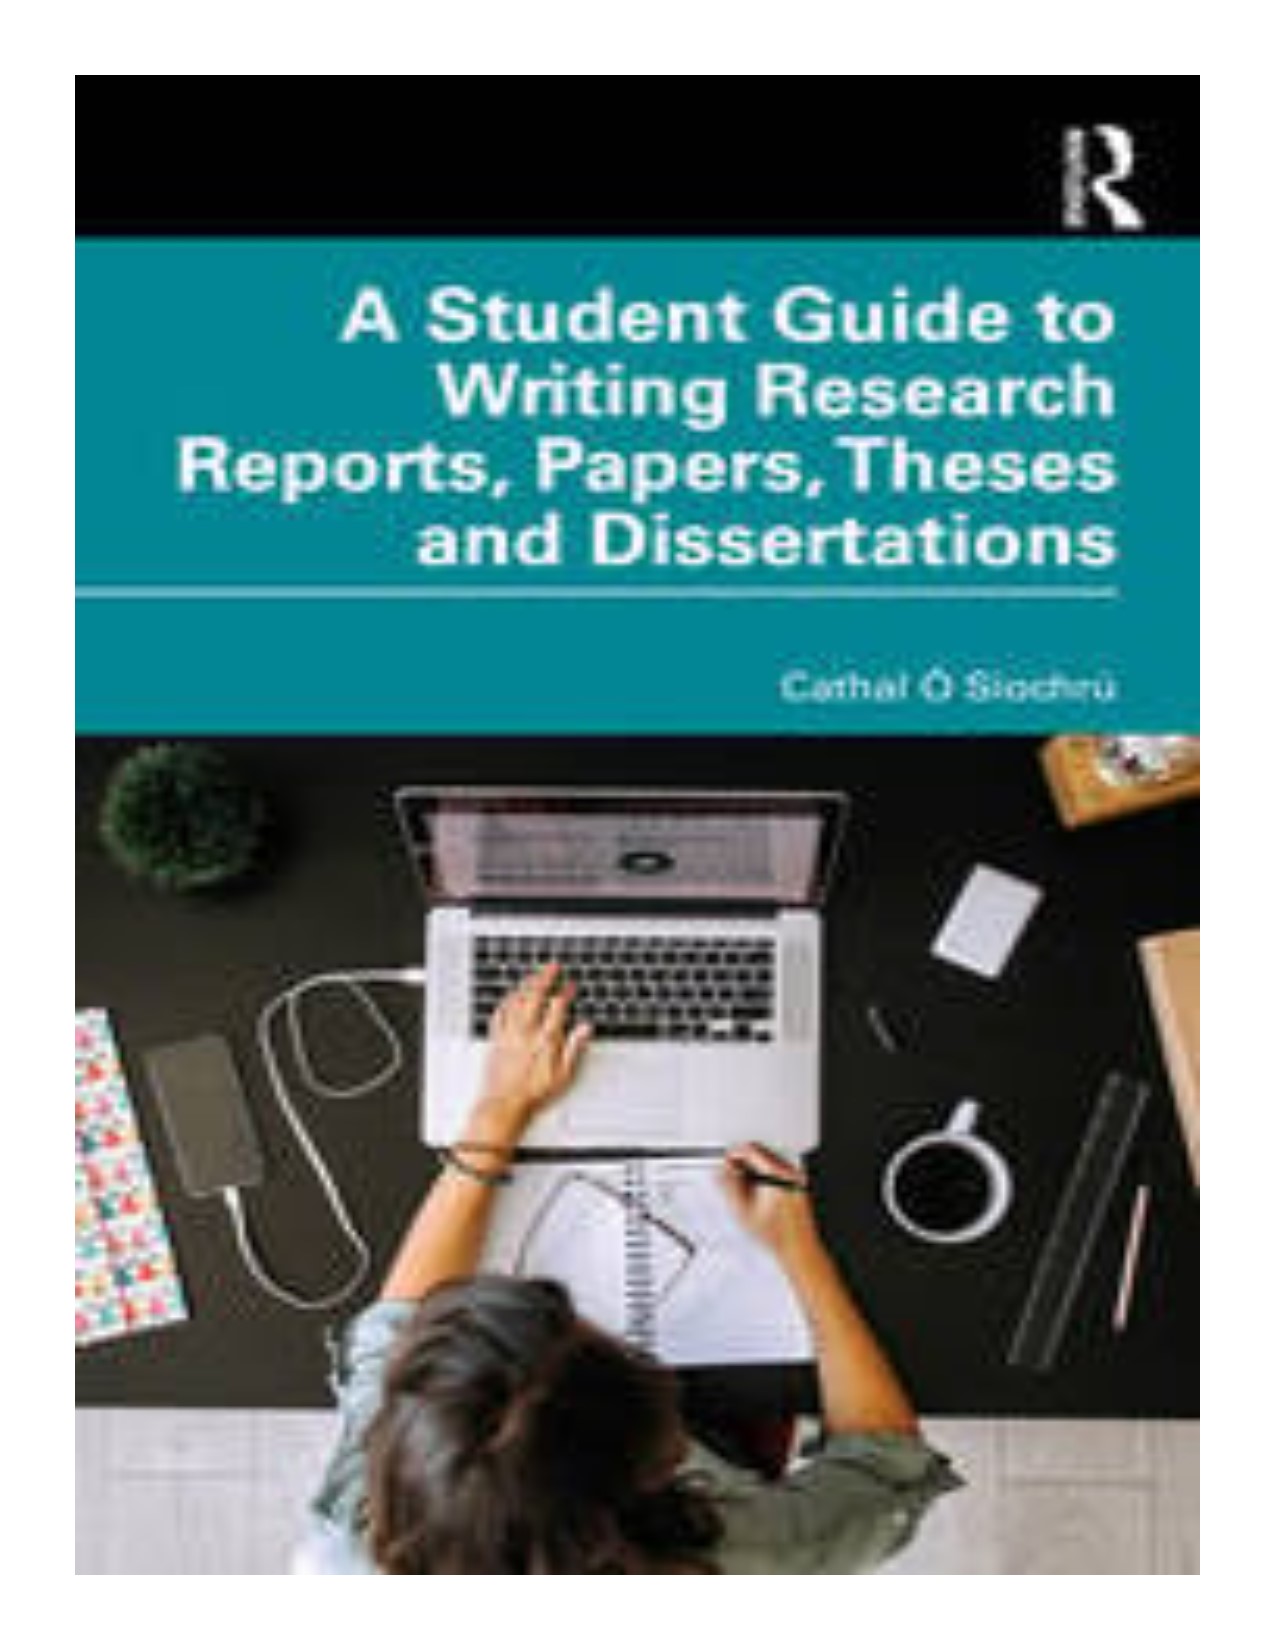 Student guide to writing research reports, papers, theses and dissertations